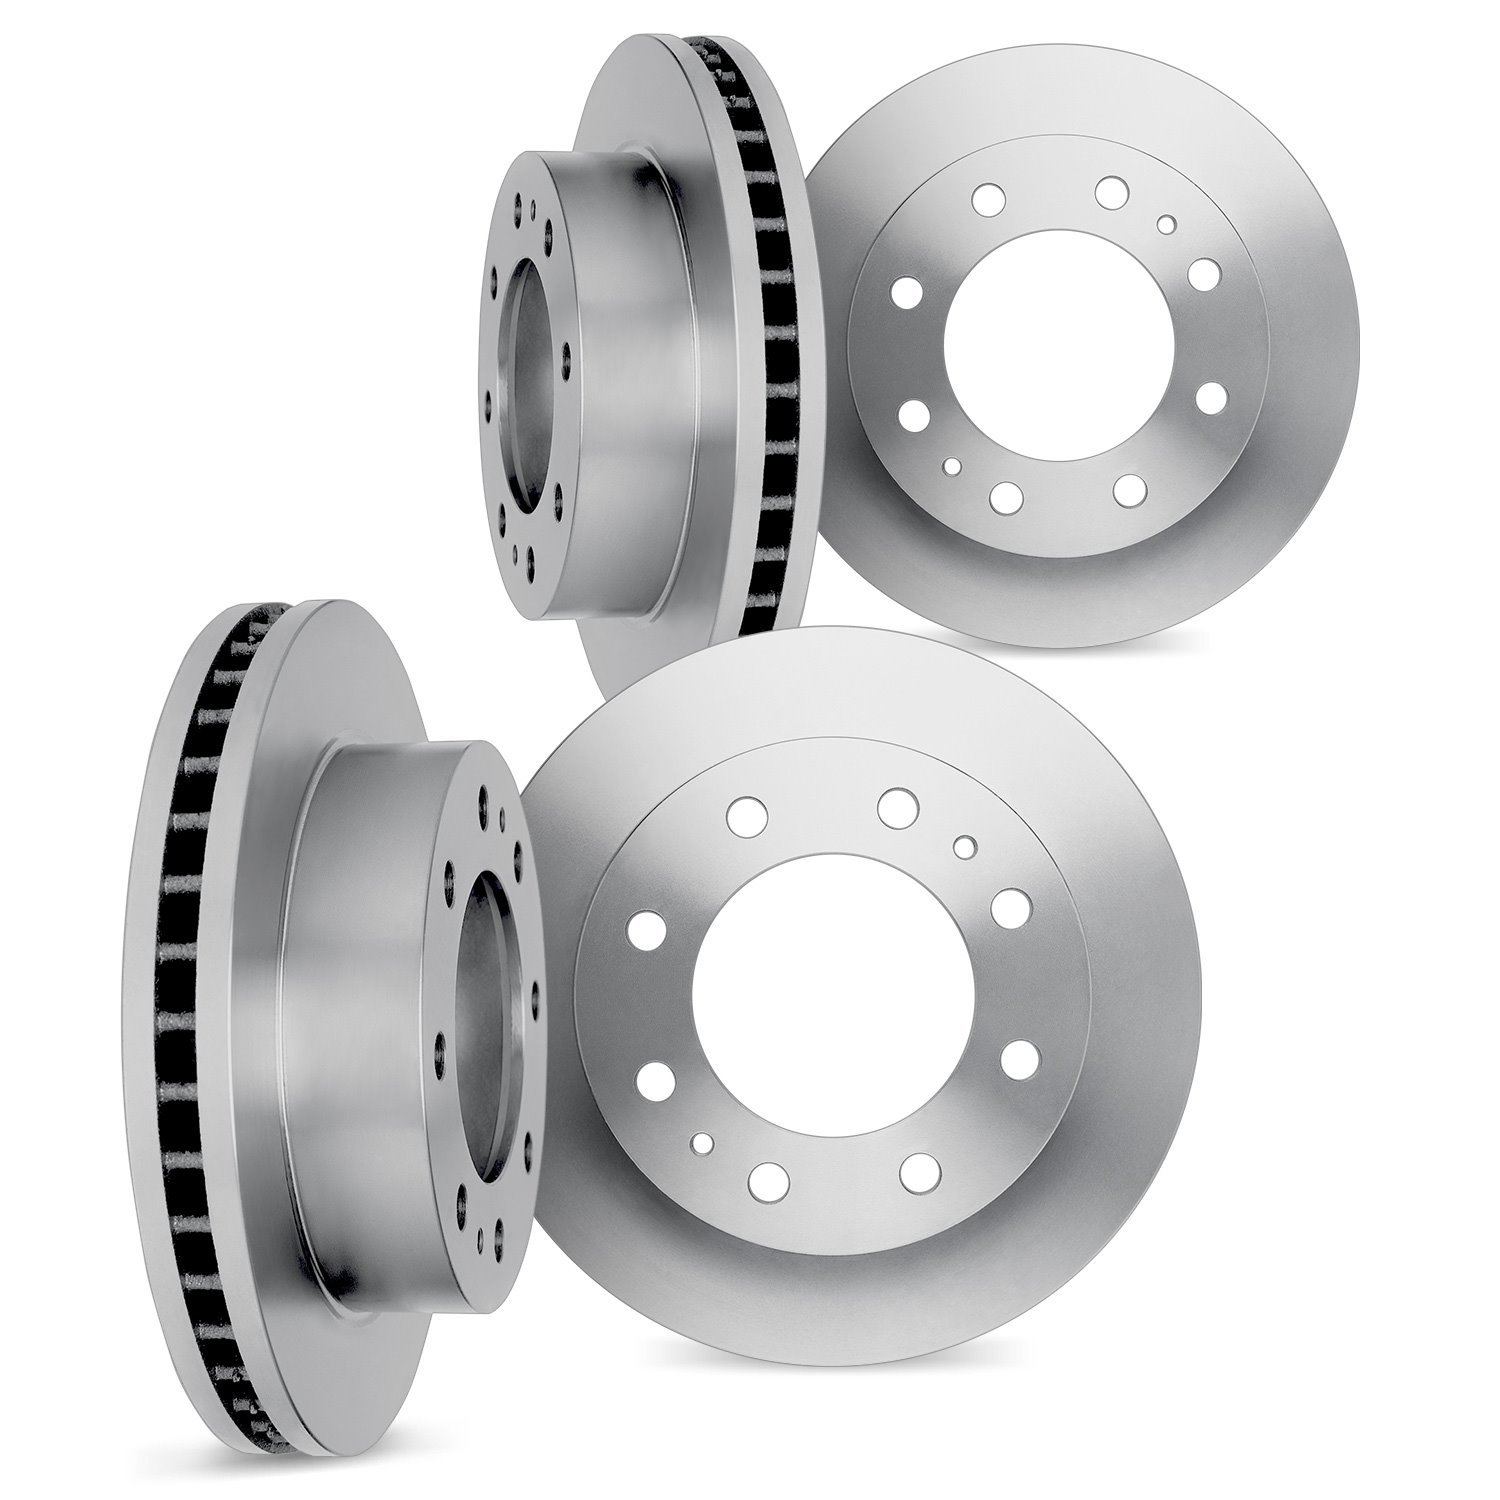 6004-54302 Brake Rotors, Fits Select Ford/Lincoln/Mercury/Mazda, Position: Front and Rear